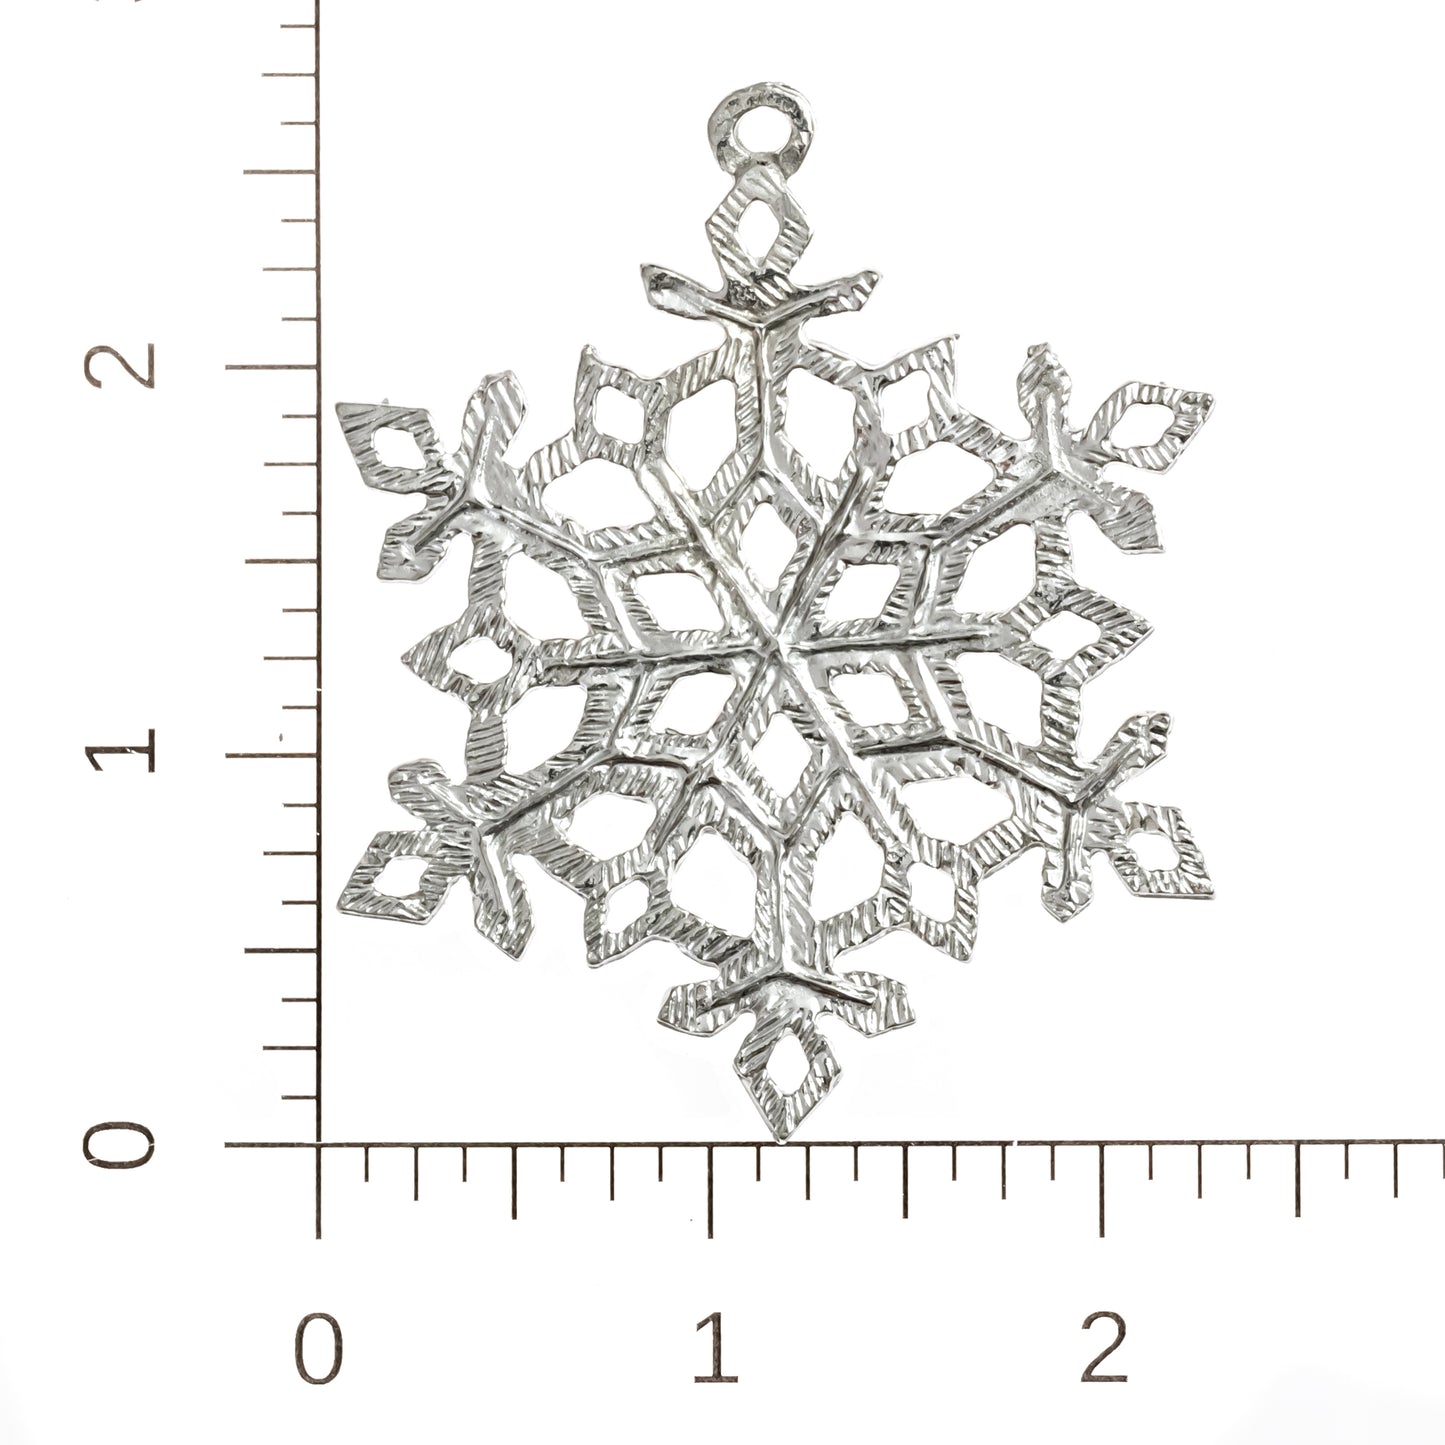 Pewter Snowflake Ornaments - Individual or Gift Set of 7